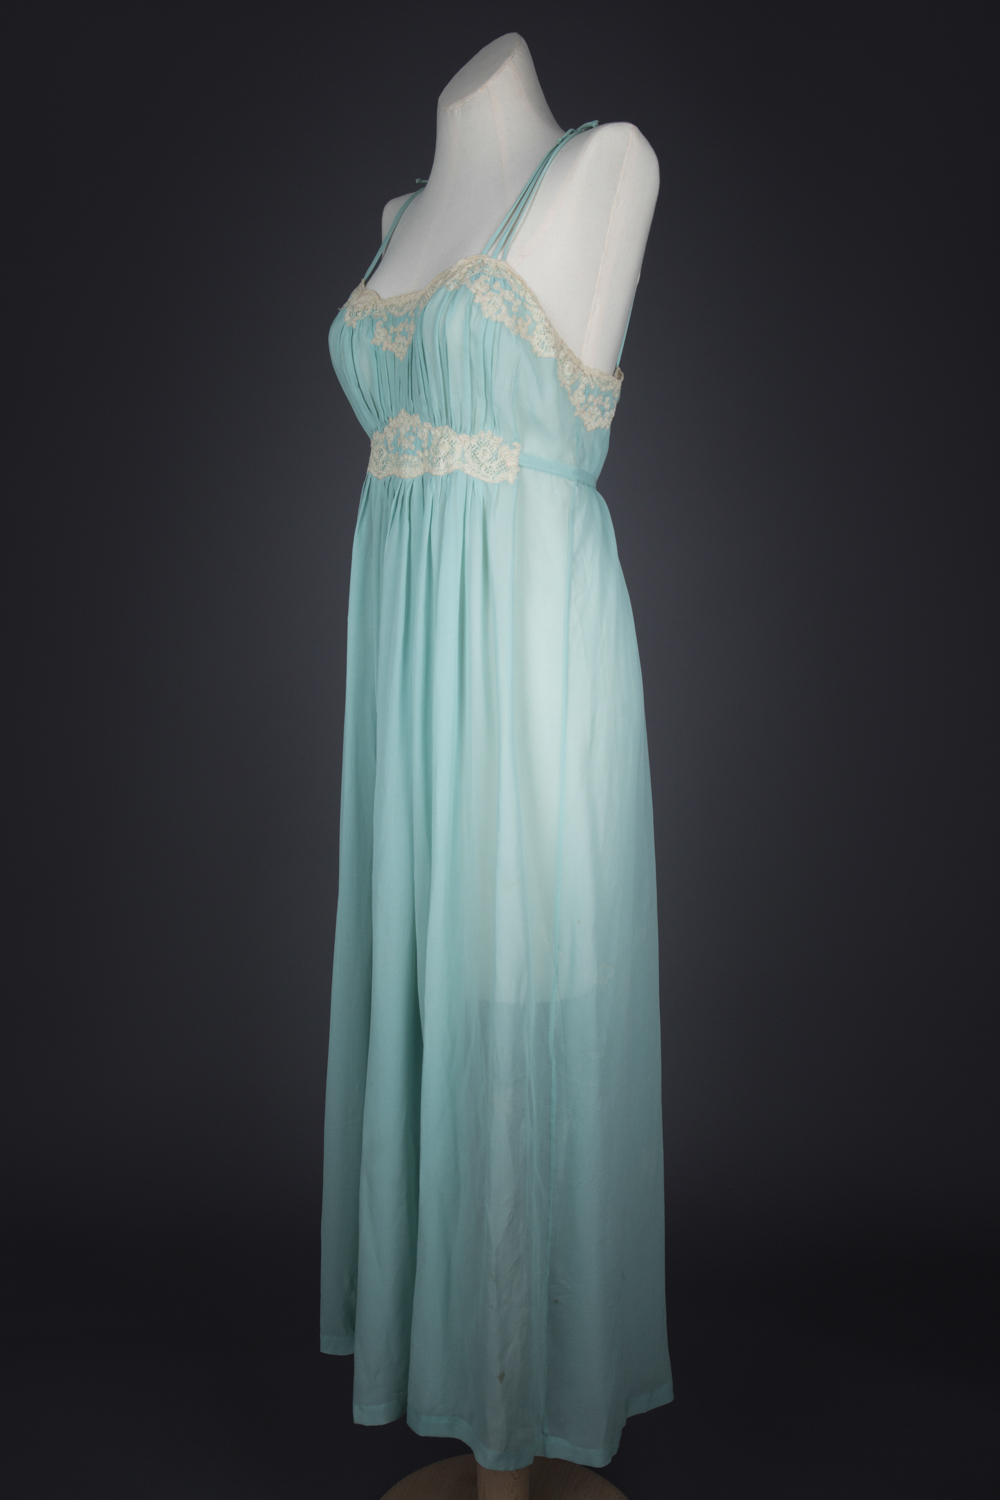 Pleated Silk Georgette Gown With Lace Appliqué by Juel Park, c. 1940s, USA. The Underpinnings Museum. Photography by Tigz Rice.